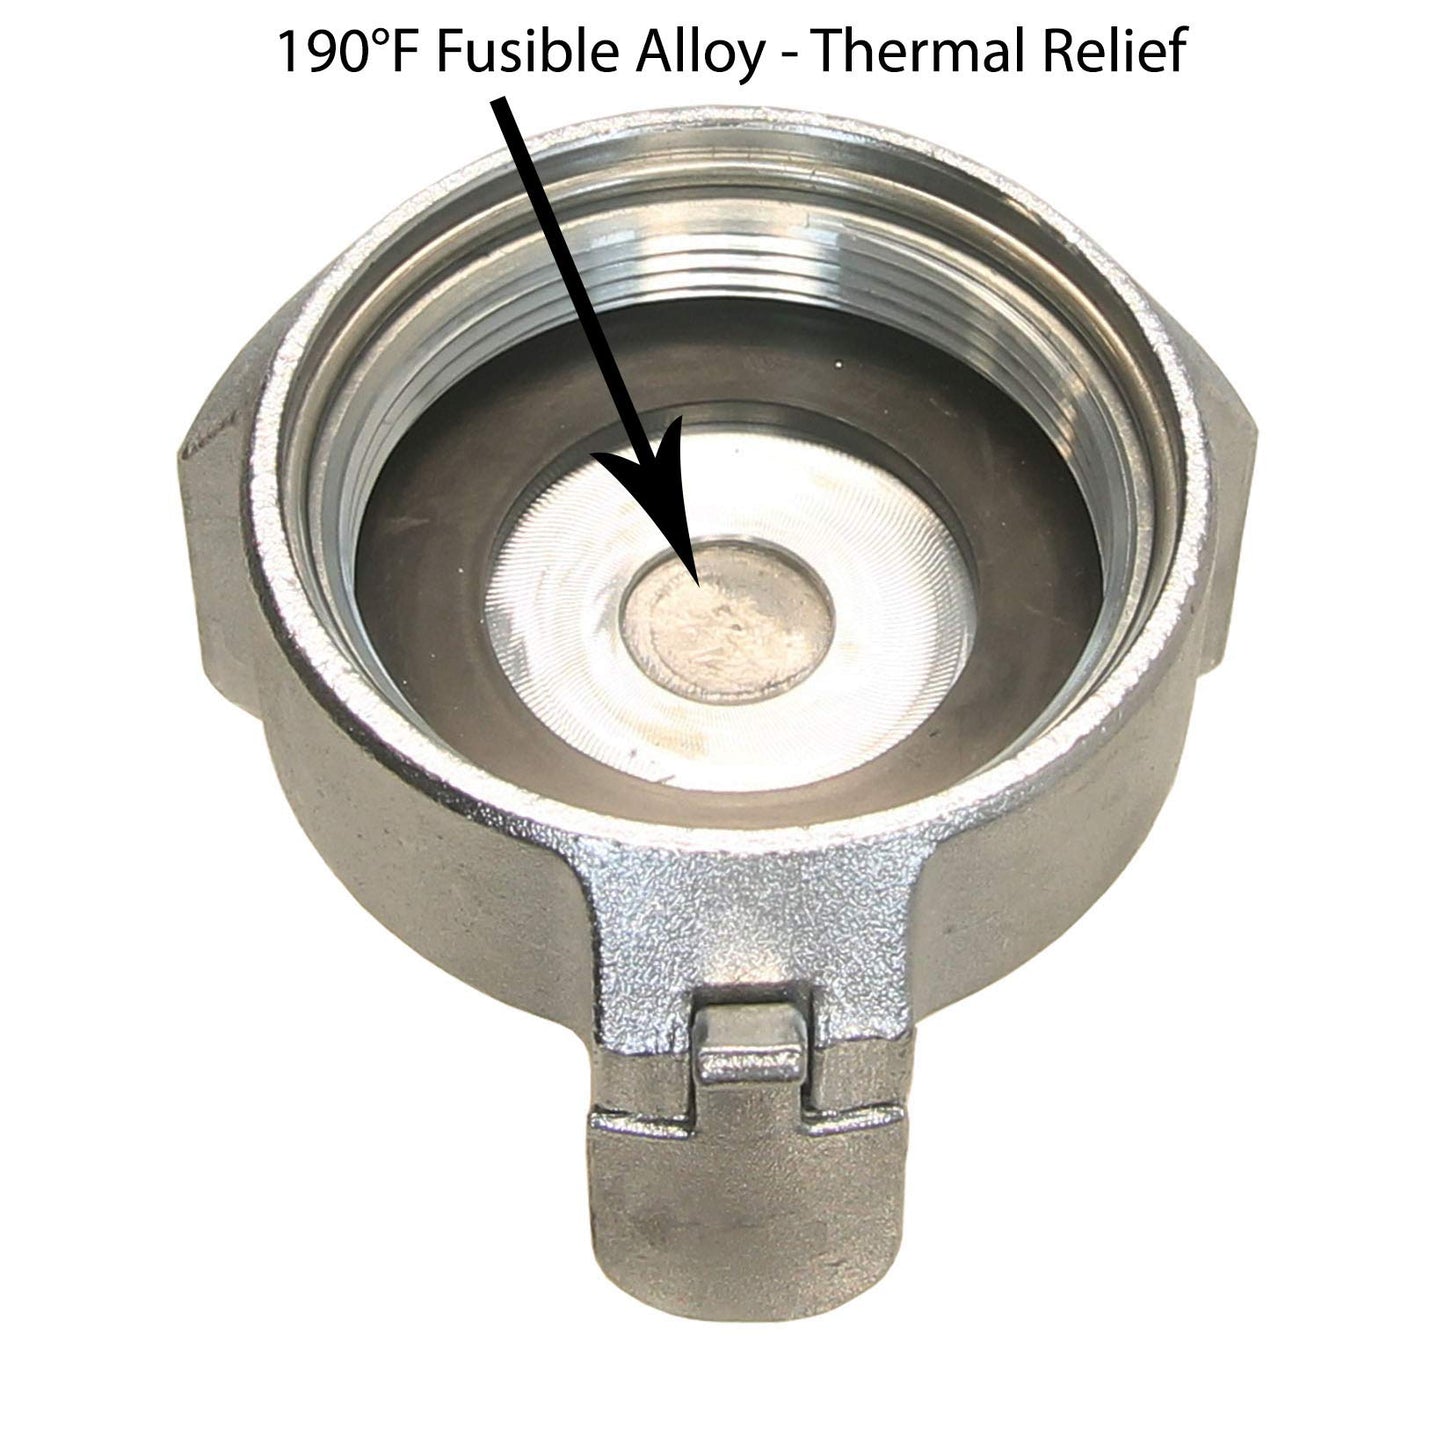 Heating Oil Tank and Reefer Fuel Tank Locking Cap